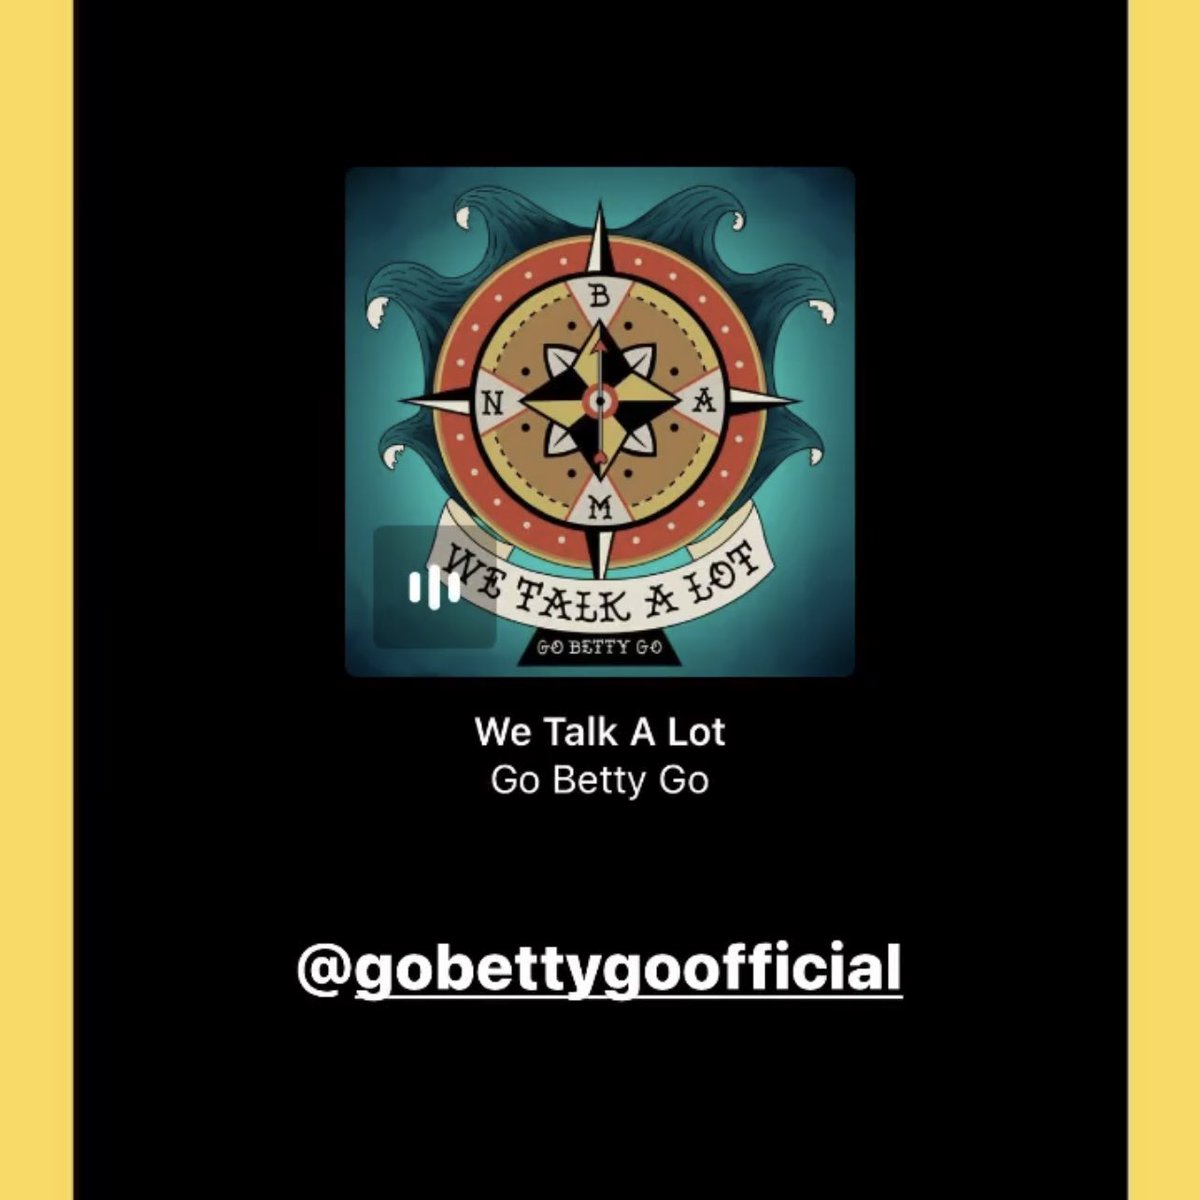 New Music This Week: We Talk A Lot by @GoBettyGo